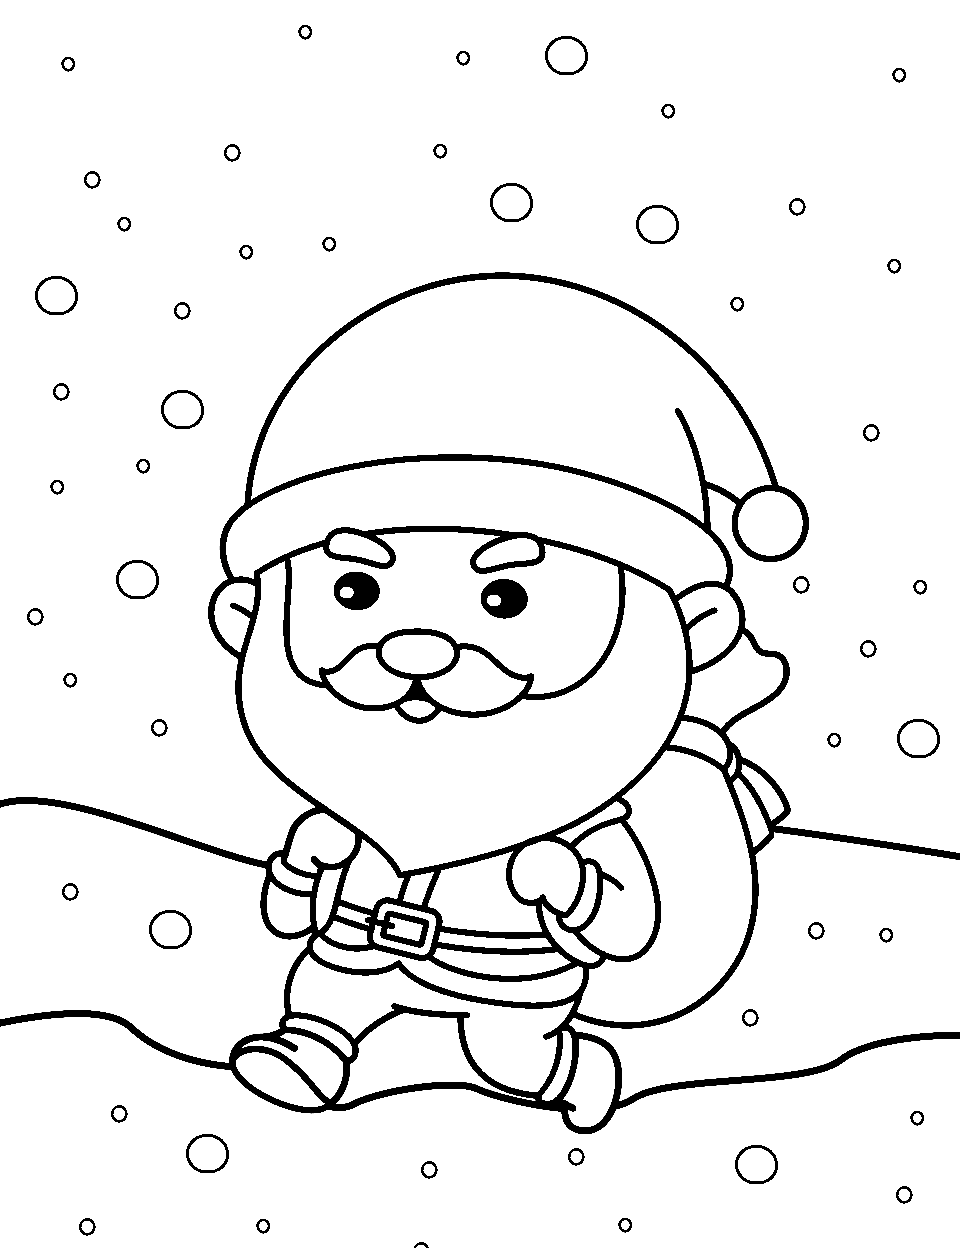 Santa Claus in a Snowstorm Coloring Page - Santa walking through a blizzard carrying gifts.